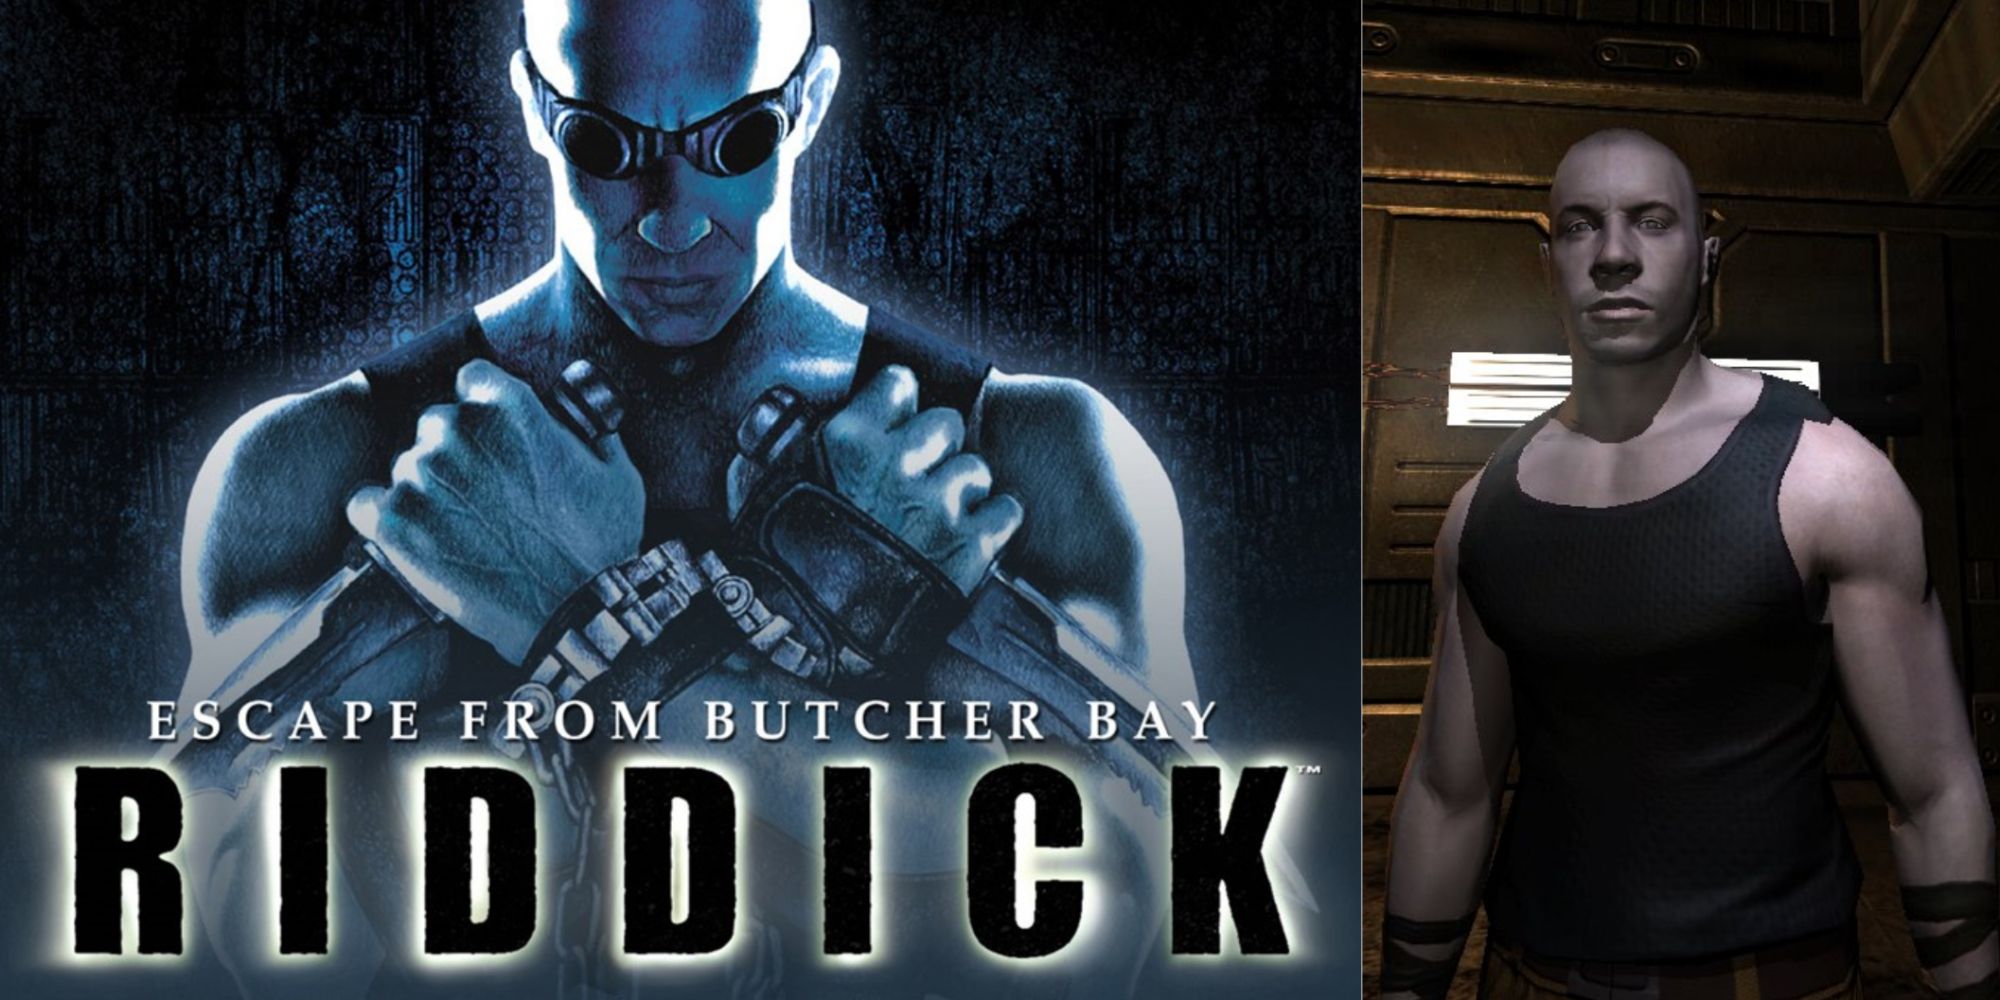 The Chronicles of Riddick escape from butcher bay cover art and a screenshot from the game.